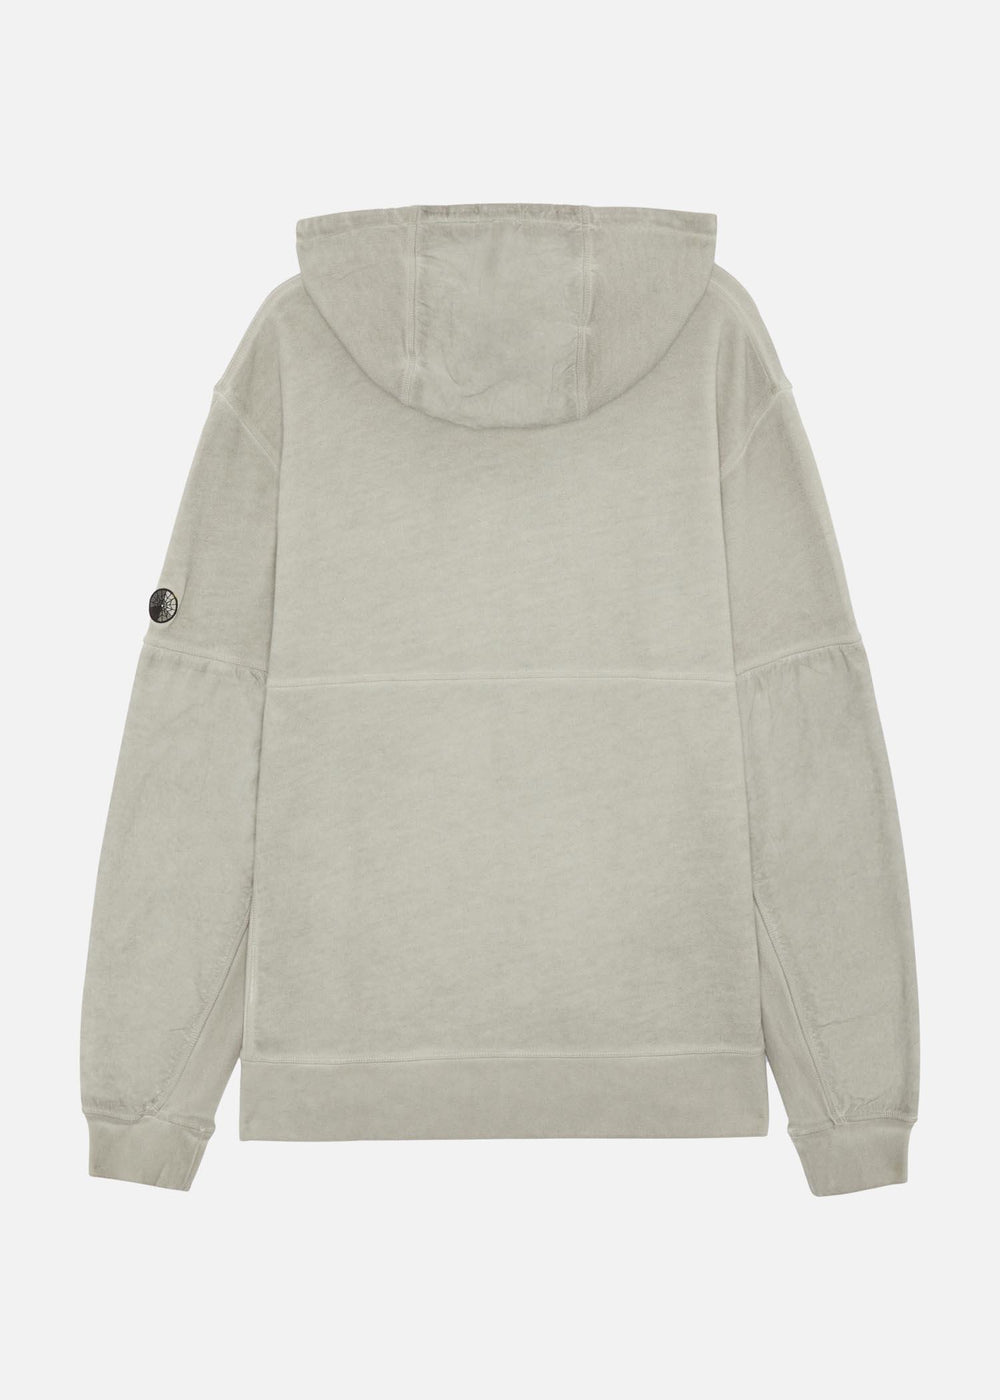 RELAXED HOODIE OFF WHITE - RÆBURN